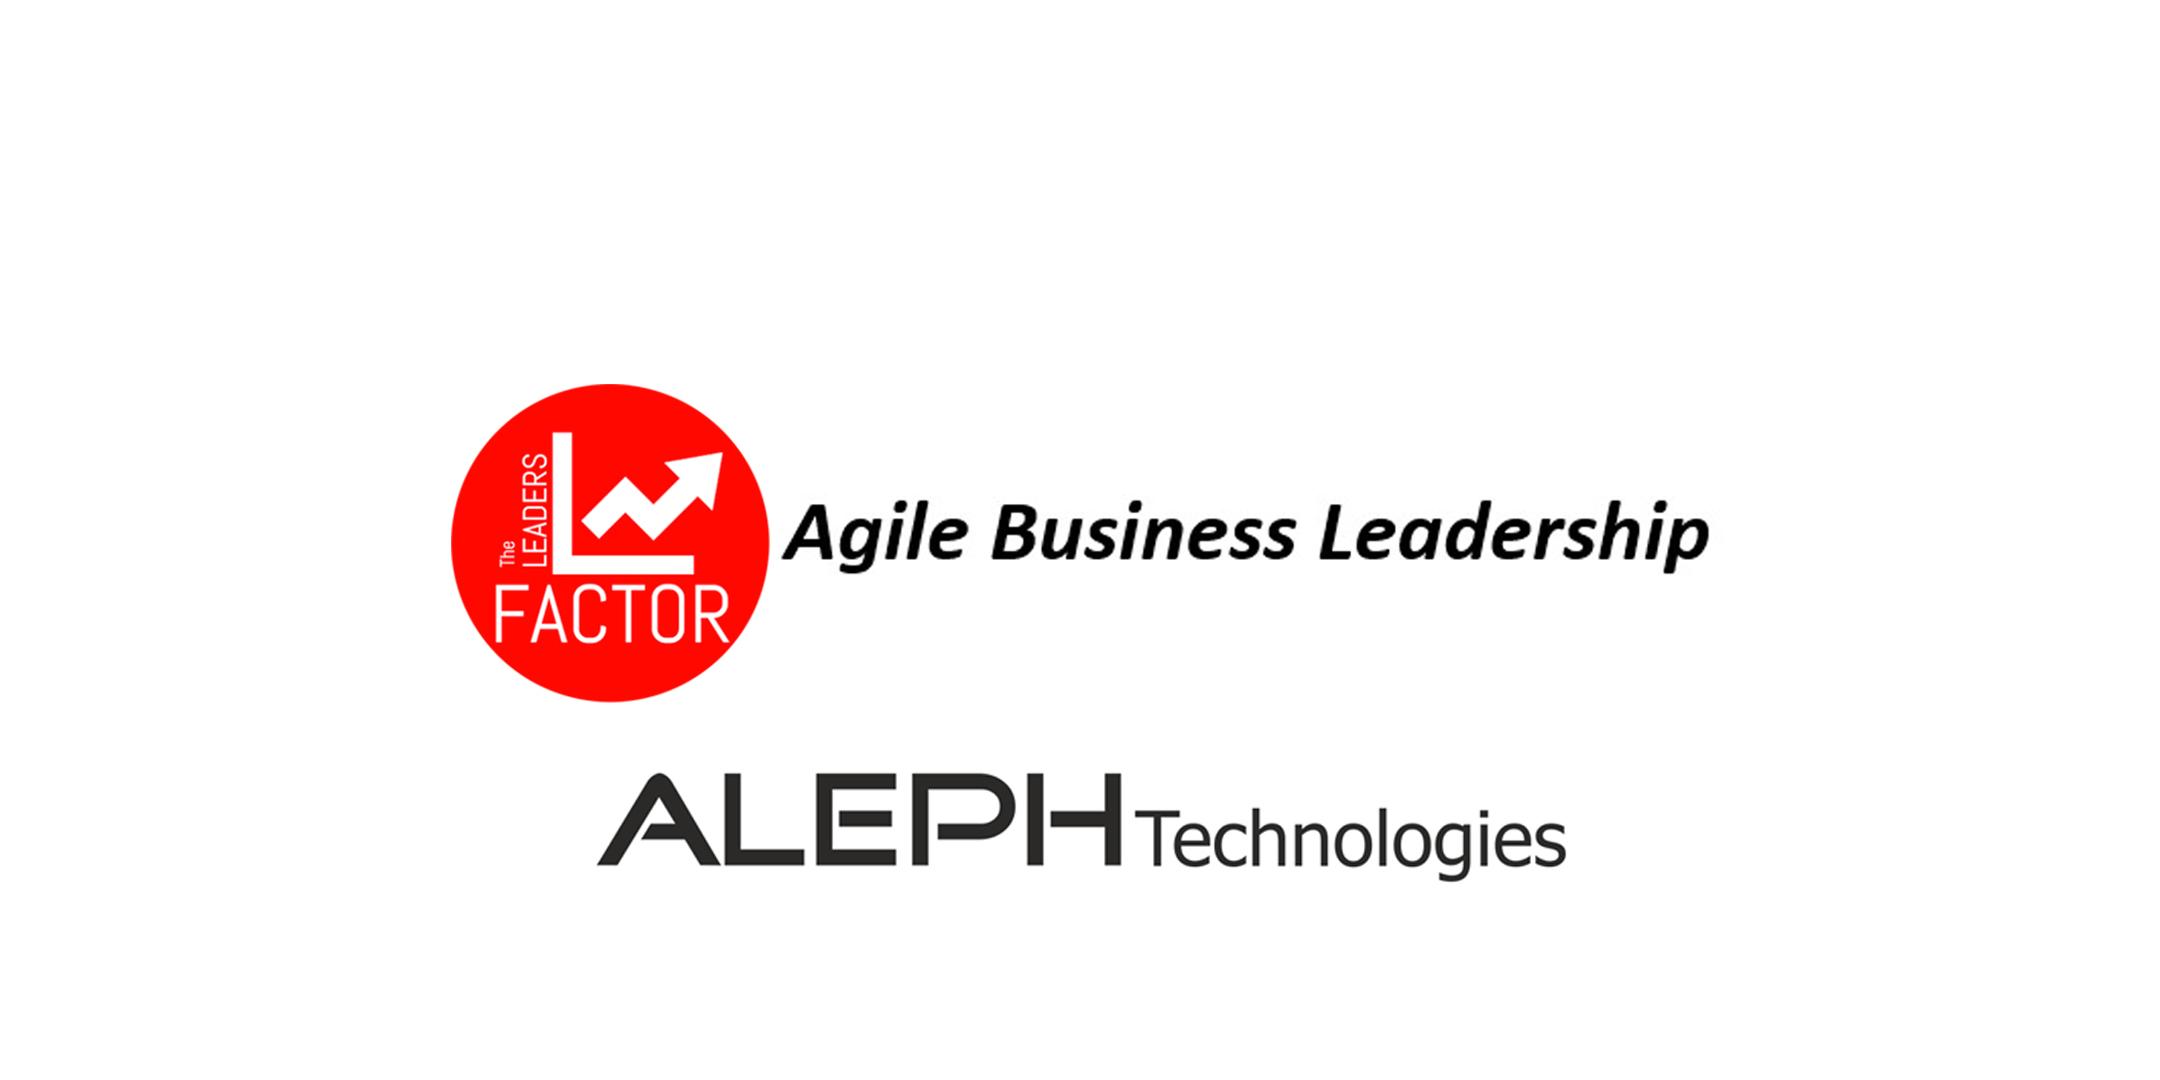 The Leaders Factor - Agile Business Leadership Workshop (Mon,May 1st - Tue,May 2nd 2017) 